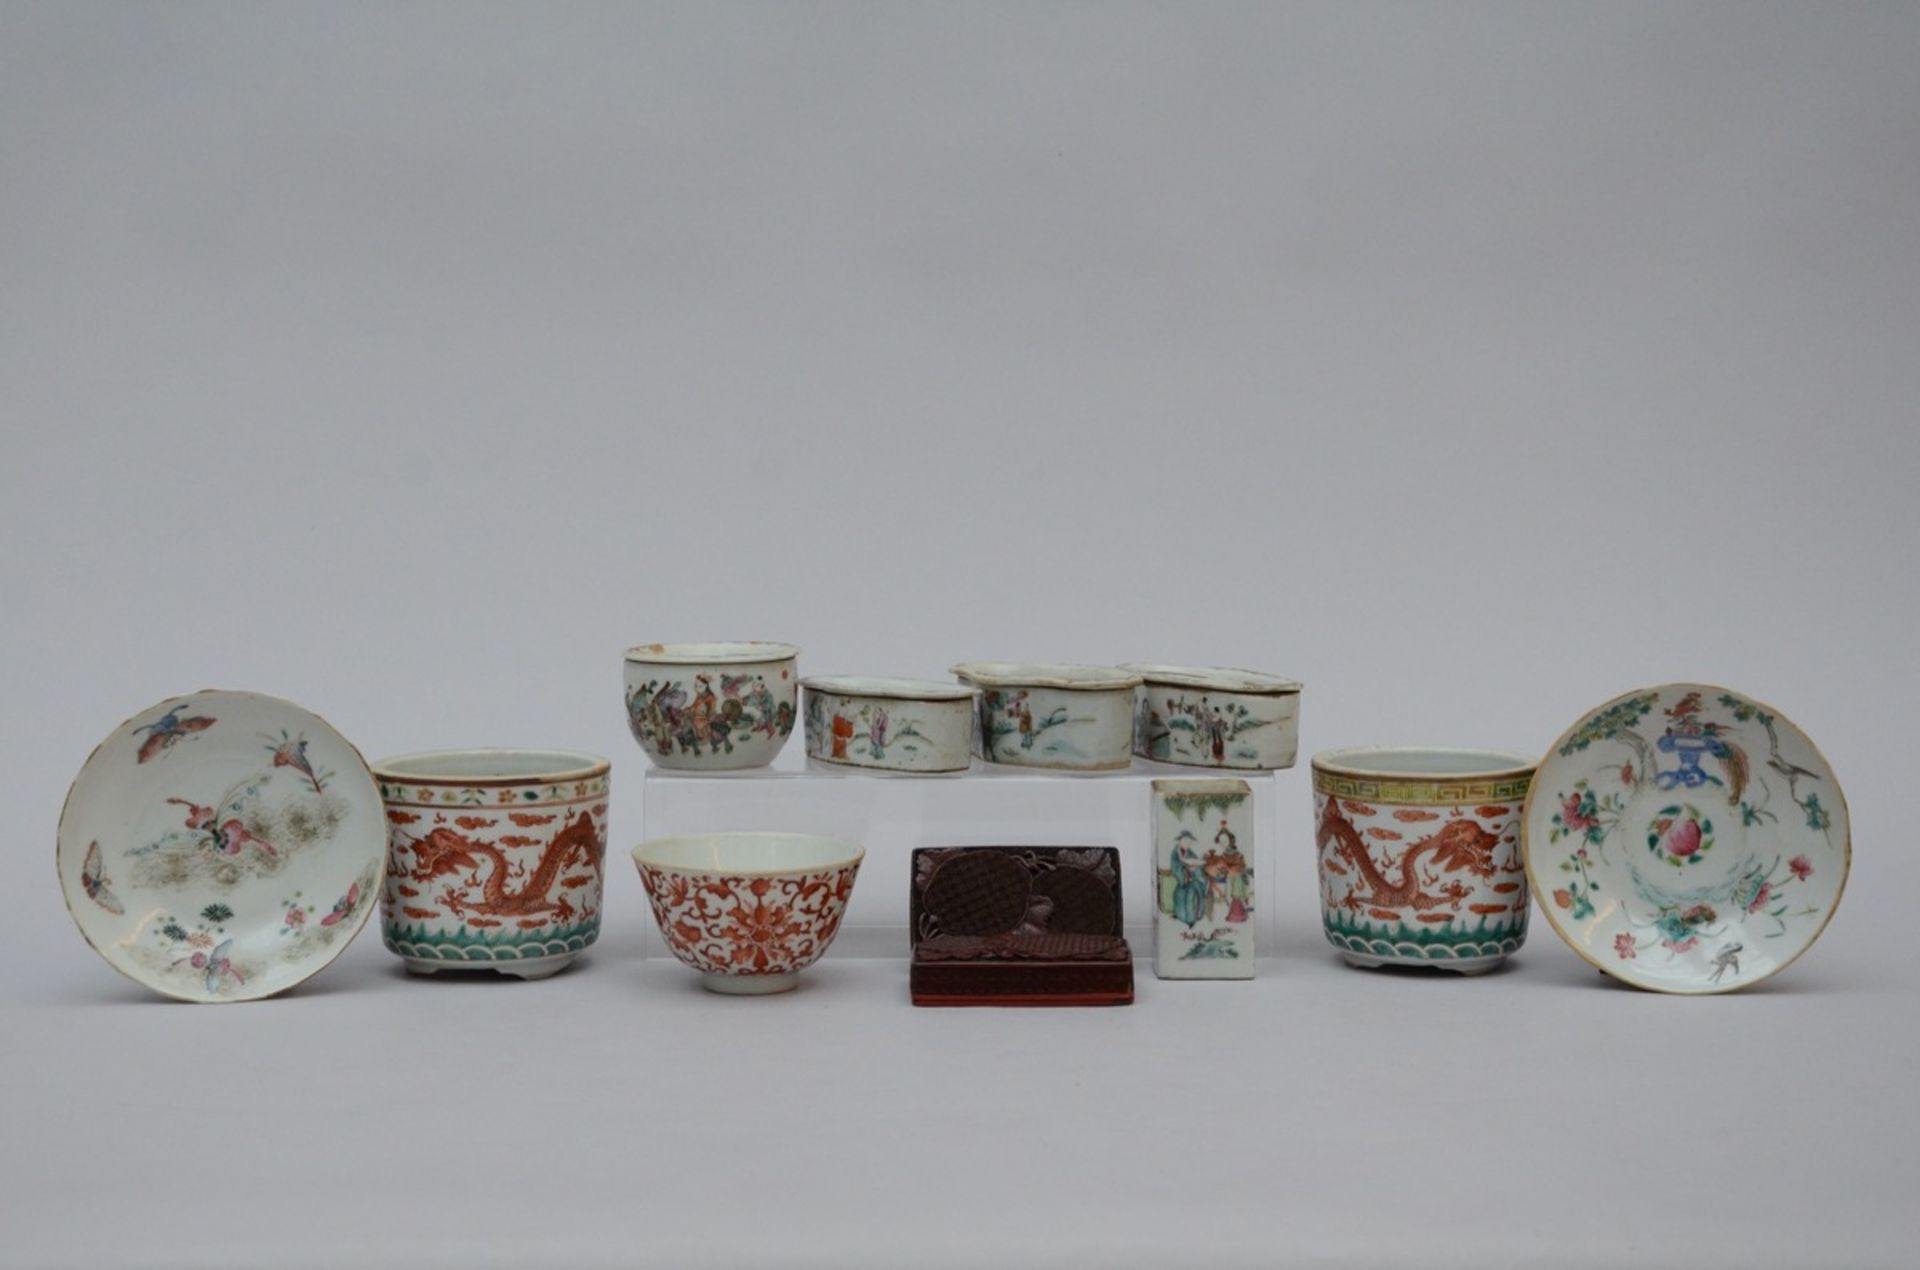 A collection of Chinese porcelain and a pair of lacquer boxes